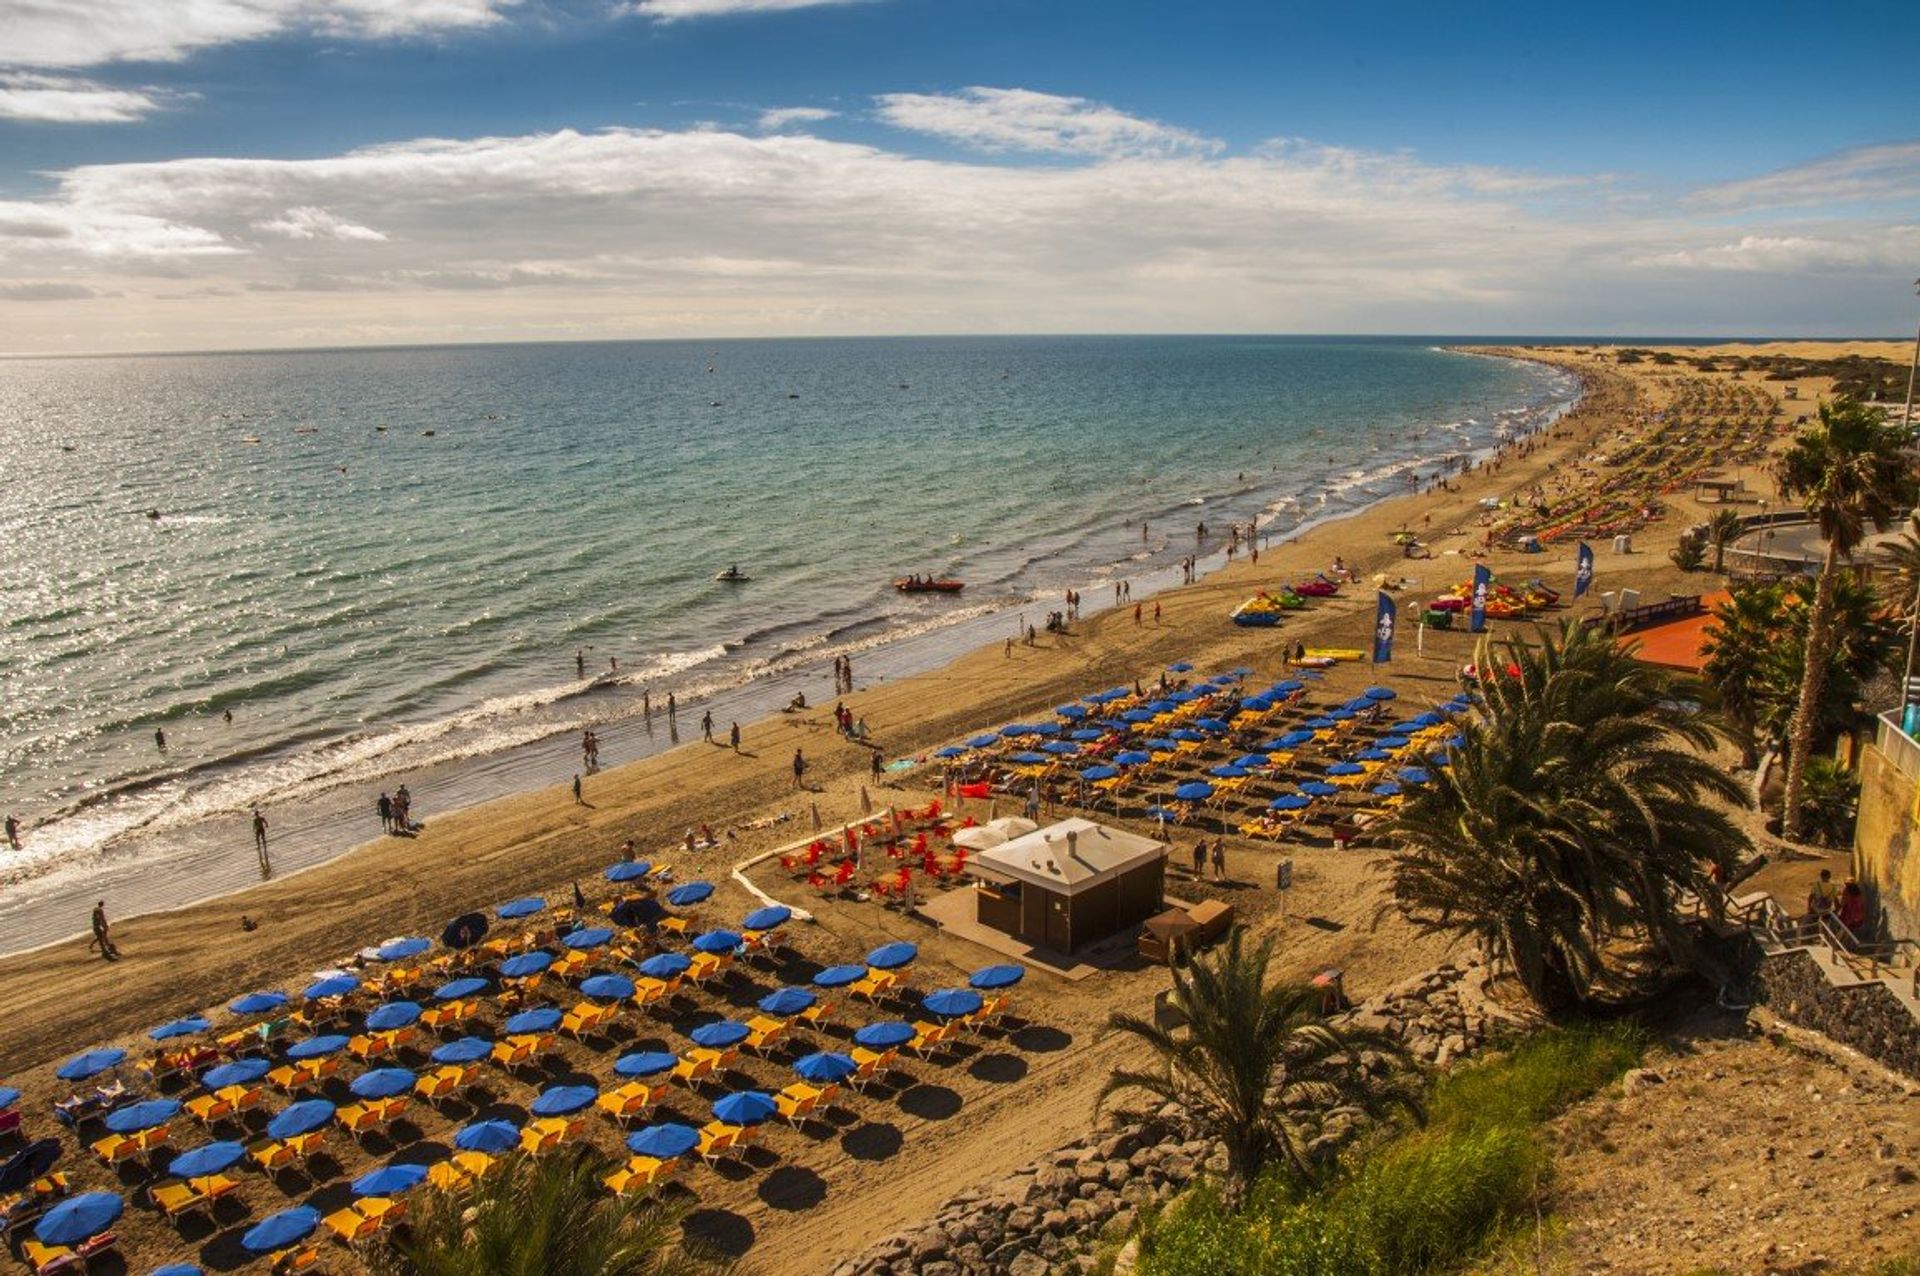 Maspalomas beach and nature reserve are the number one reason why so many visit Gran Canaria